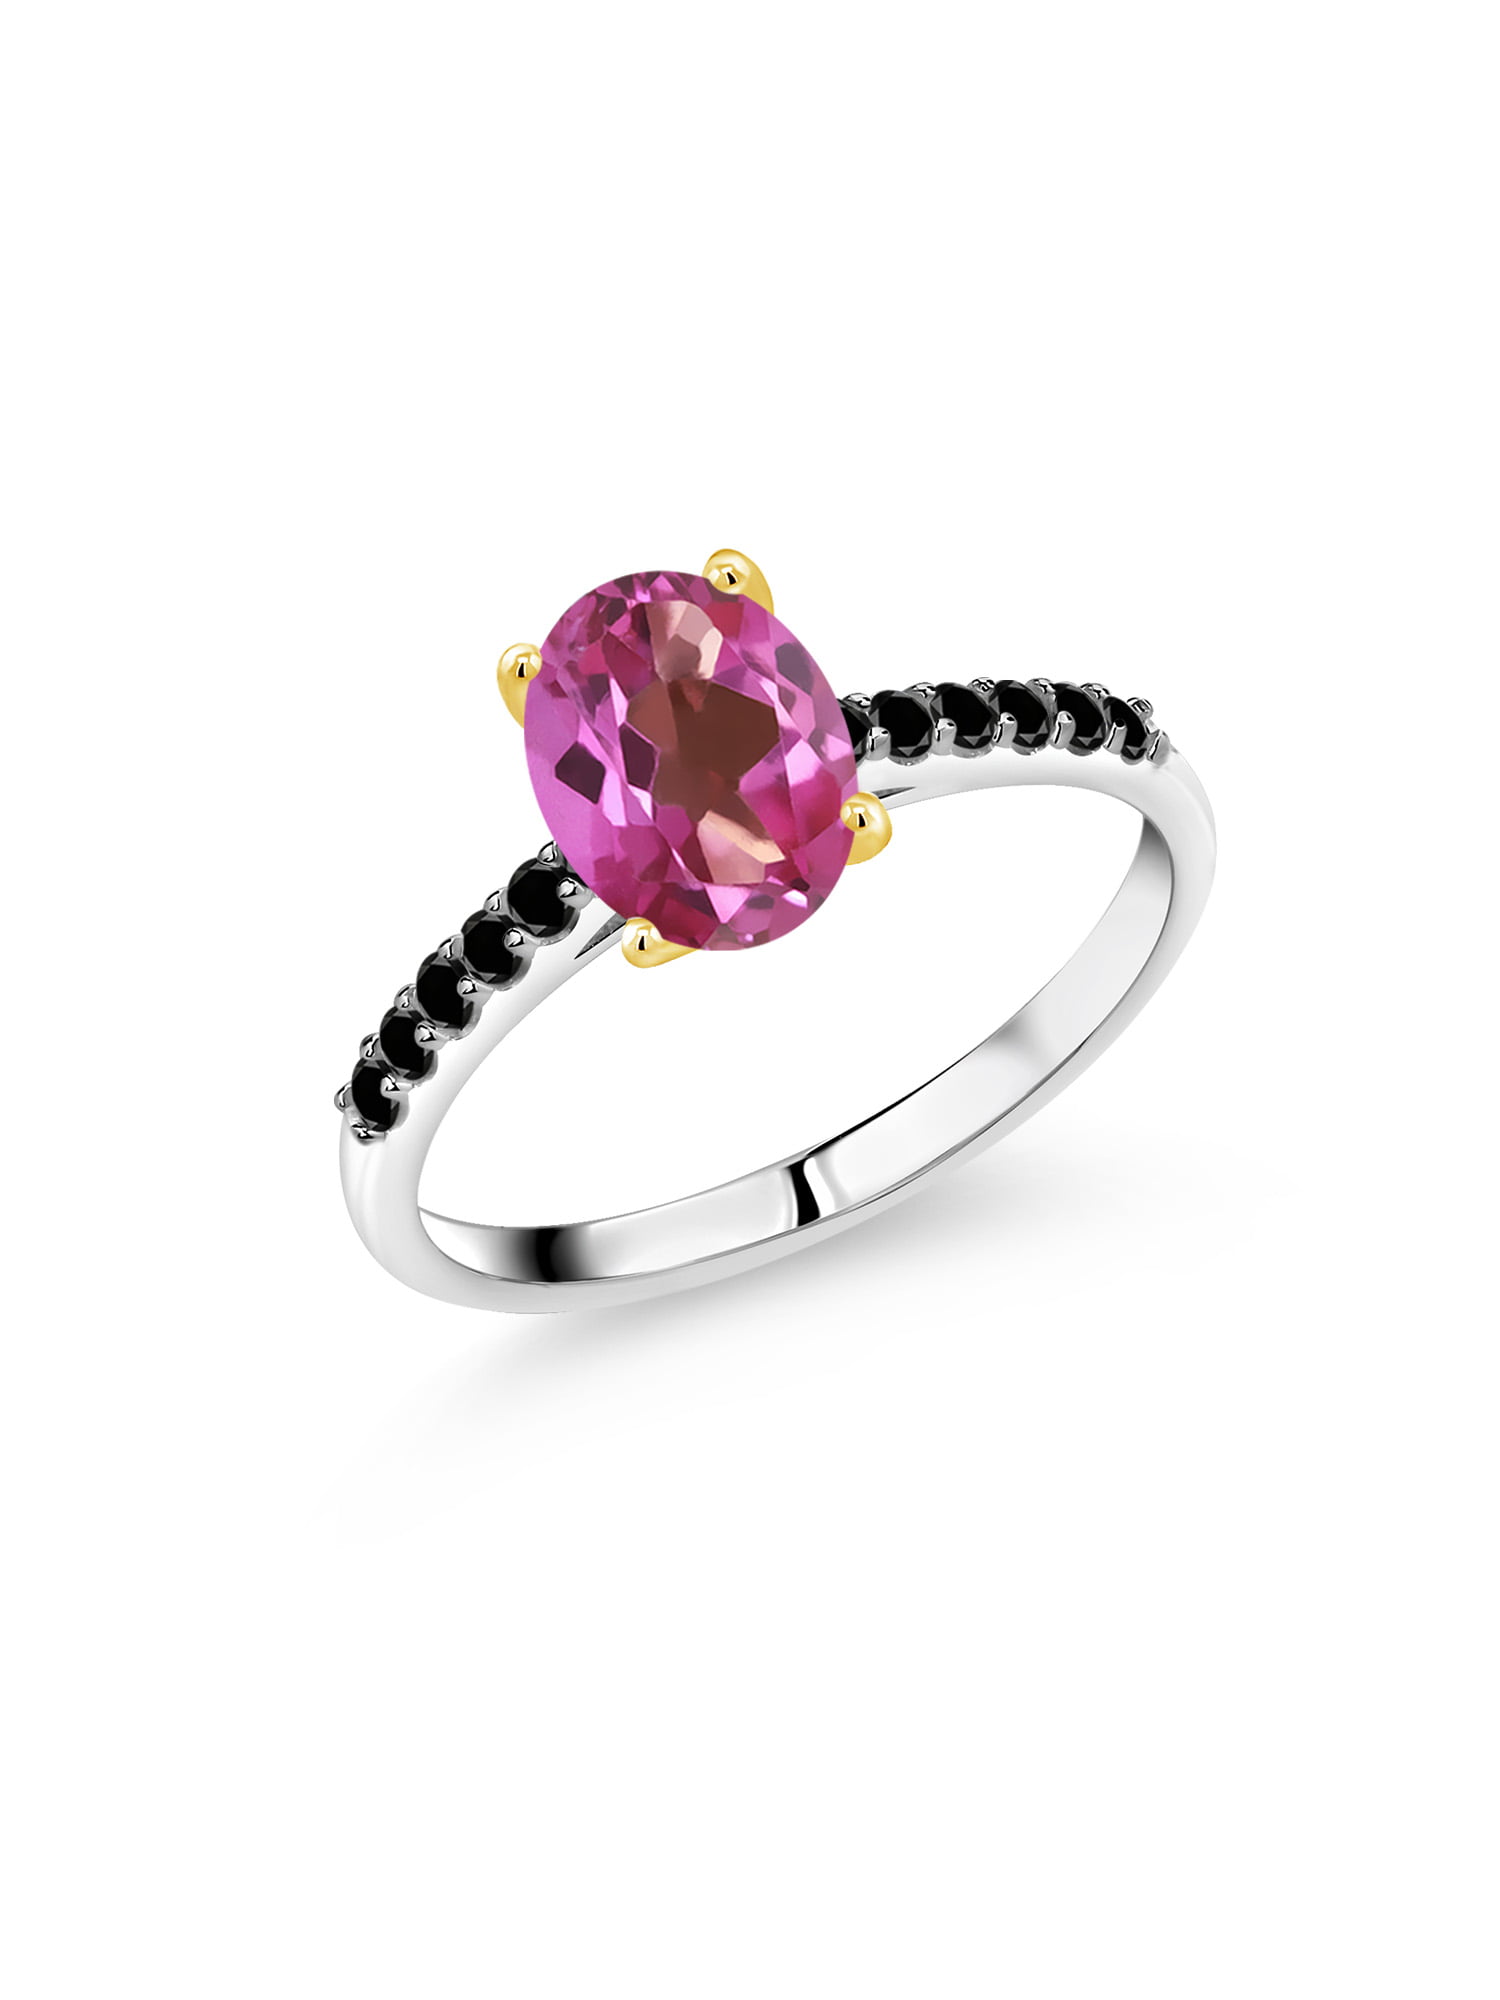 Gem Stone King 925 Sterling Silver 1.50 Ct Round Pink Mystic Topaz Womens Halo Engagement Ring 